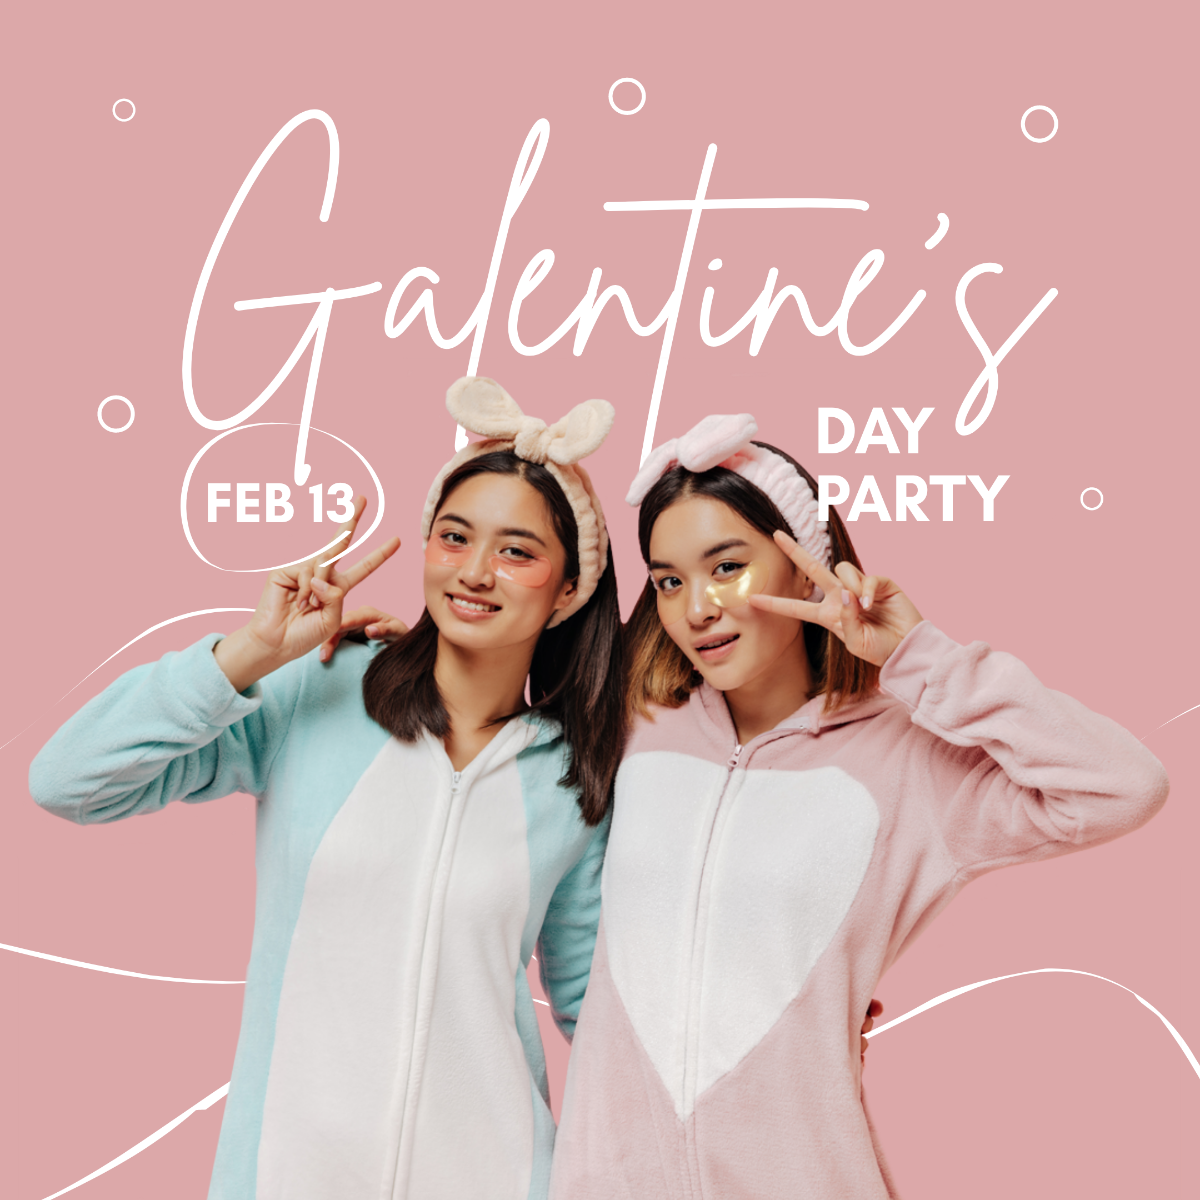 Galentines Day Party Instagram Post